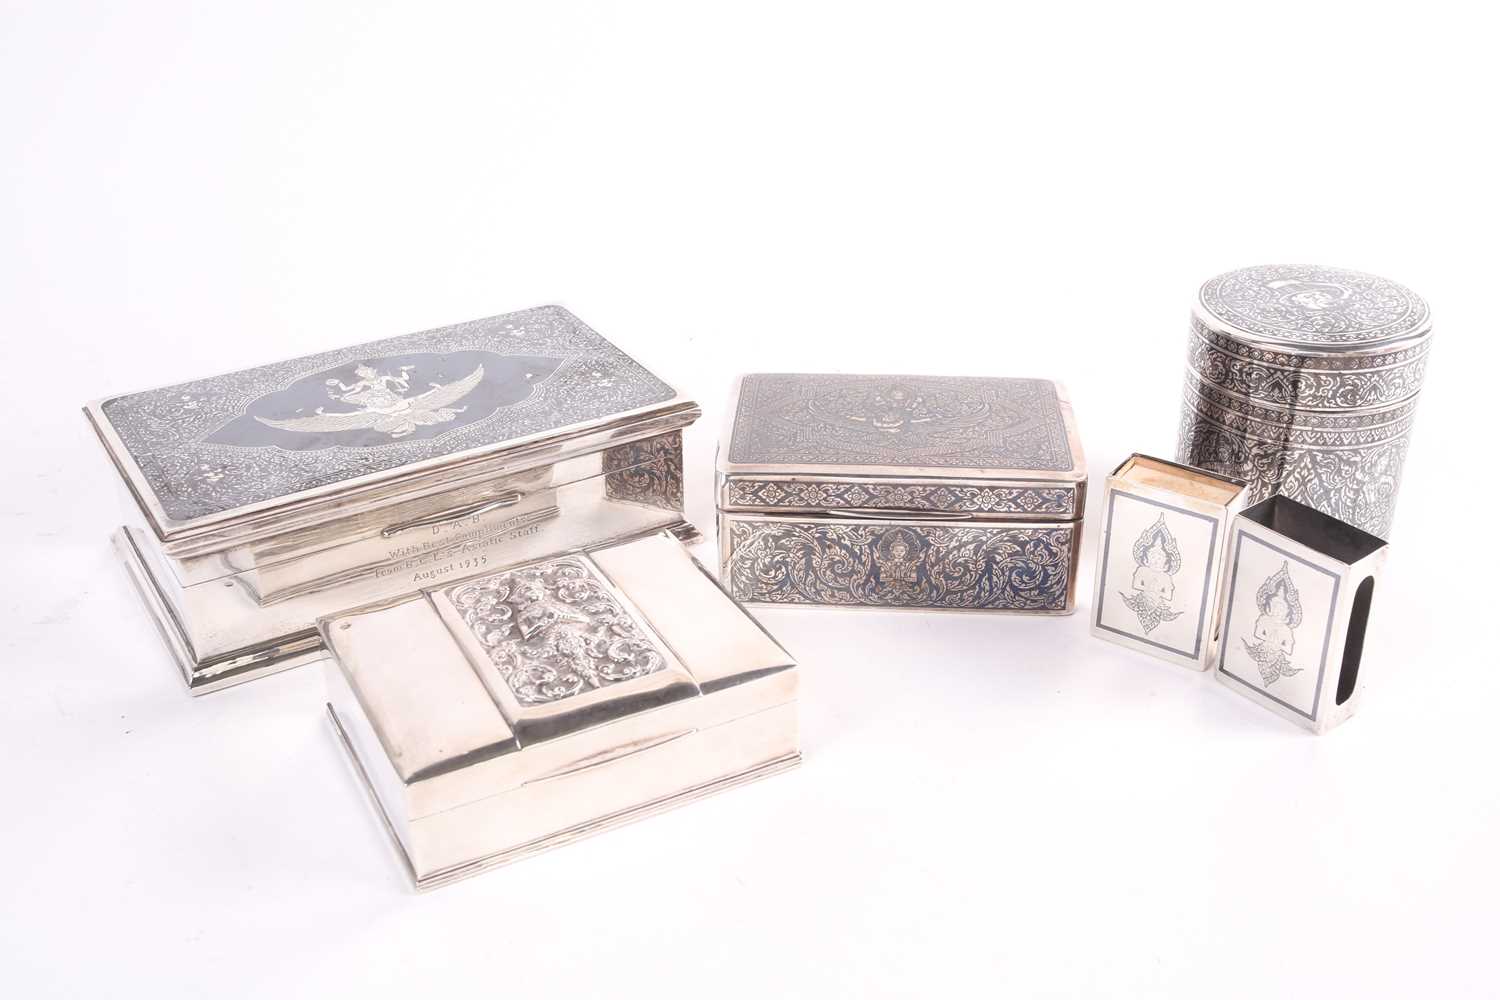 A Tai white metal niello rectangular cigarette box inscribed “D.A.B. with best compliments From B.